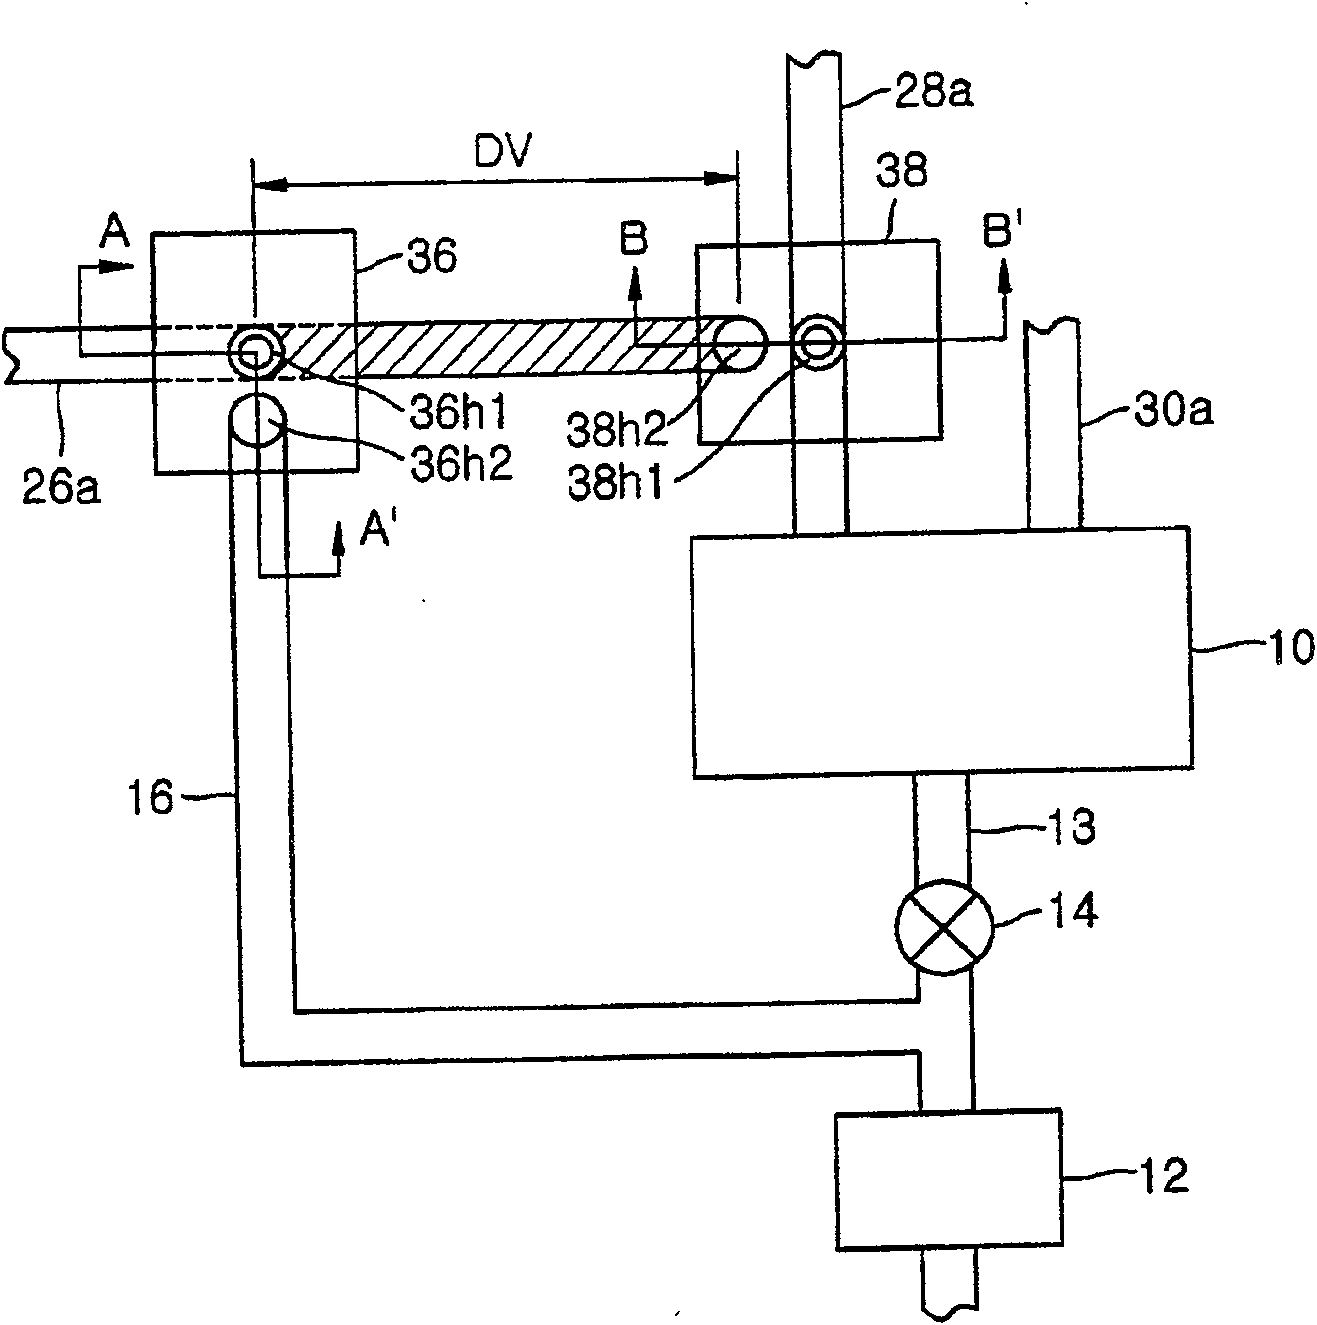 Apparatus for fabricating semiconductor device, control method, and method of fabricating semiconductor device